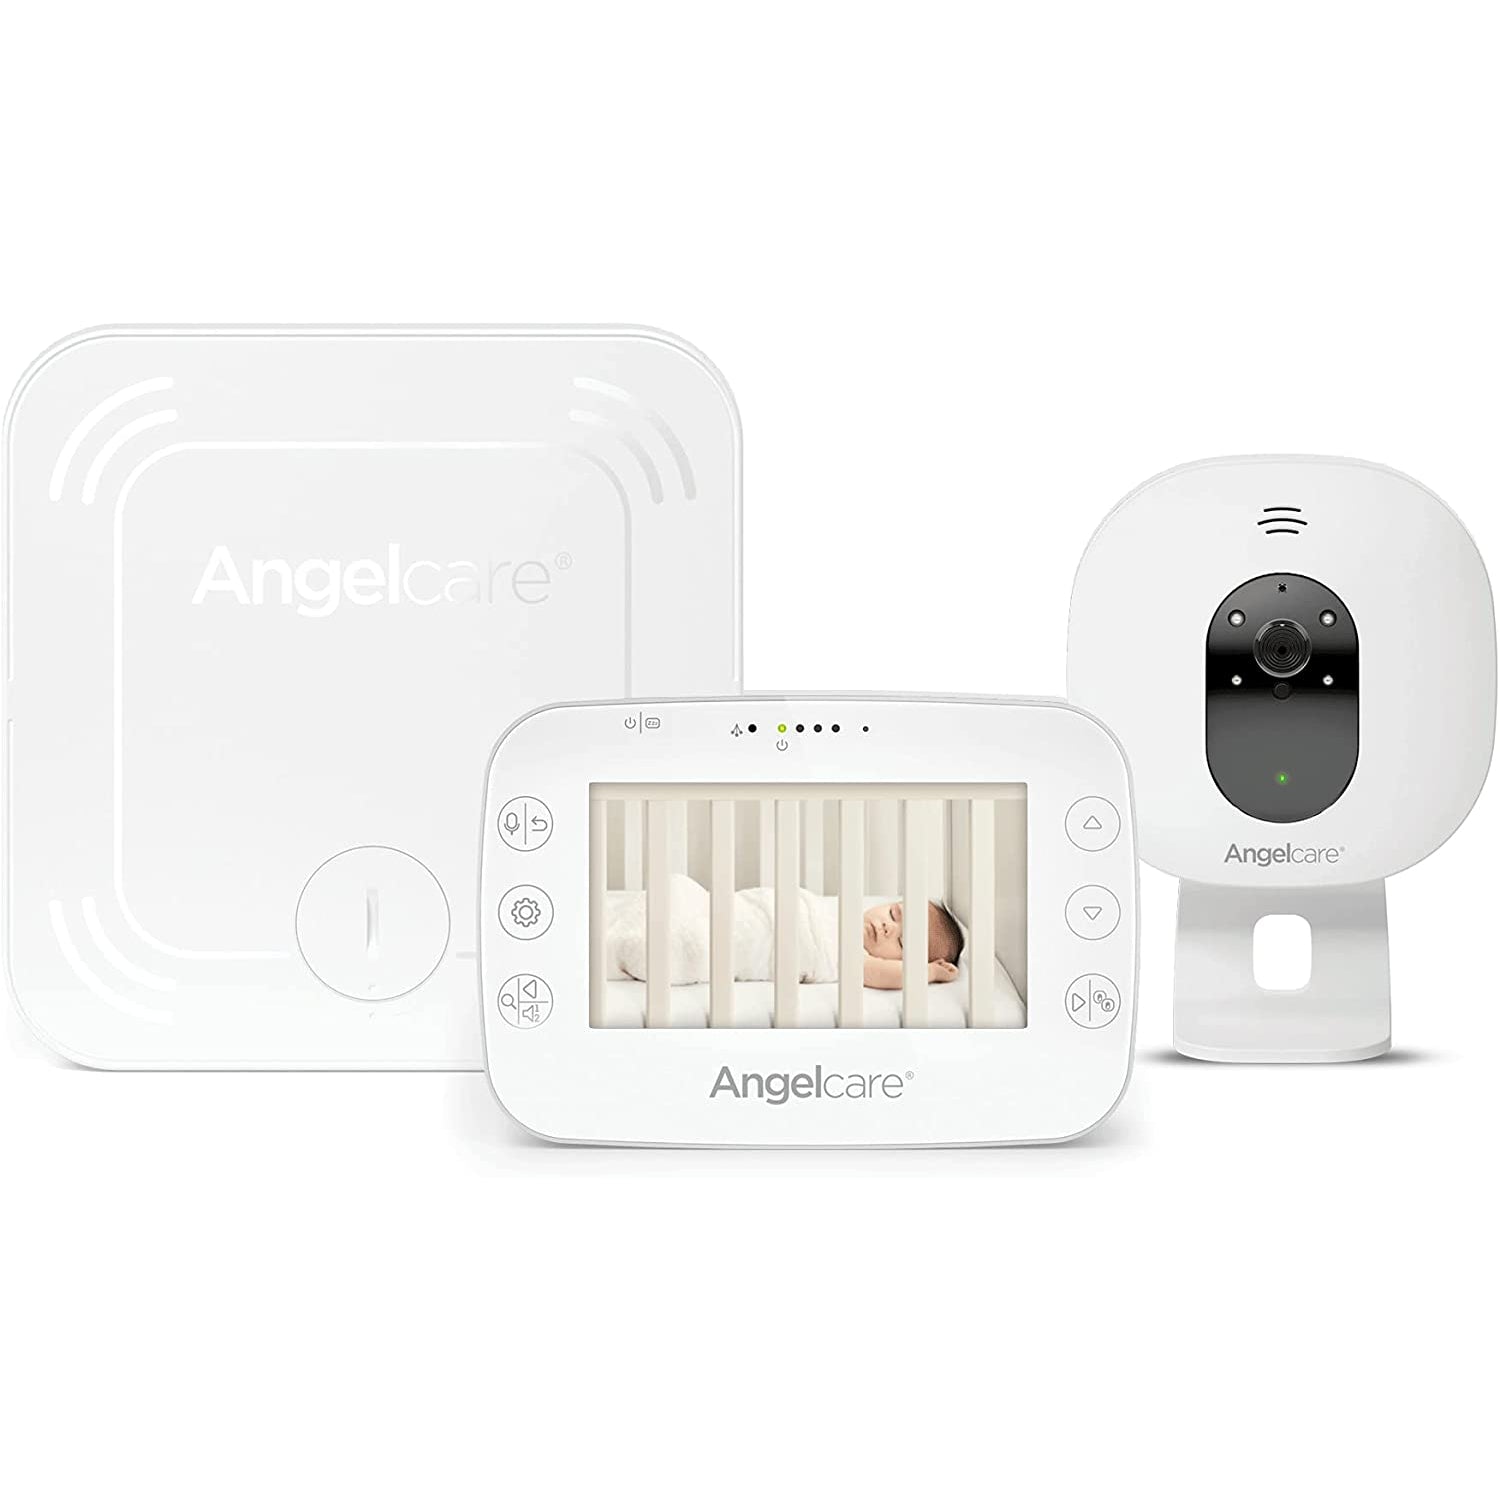 Angelcare AC327 Baby Movement Monitor with Video & Sound - White - Refurbished Excellent